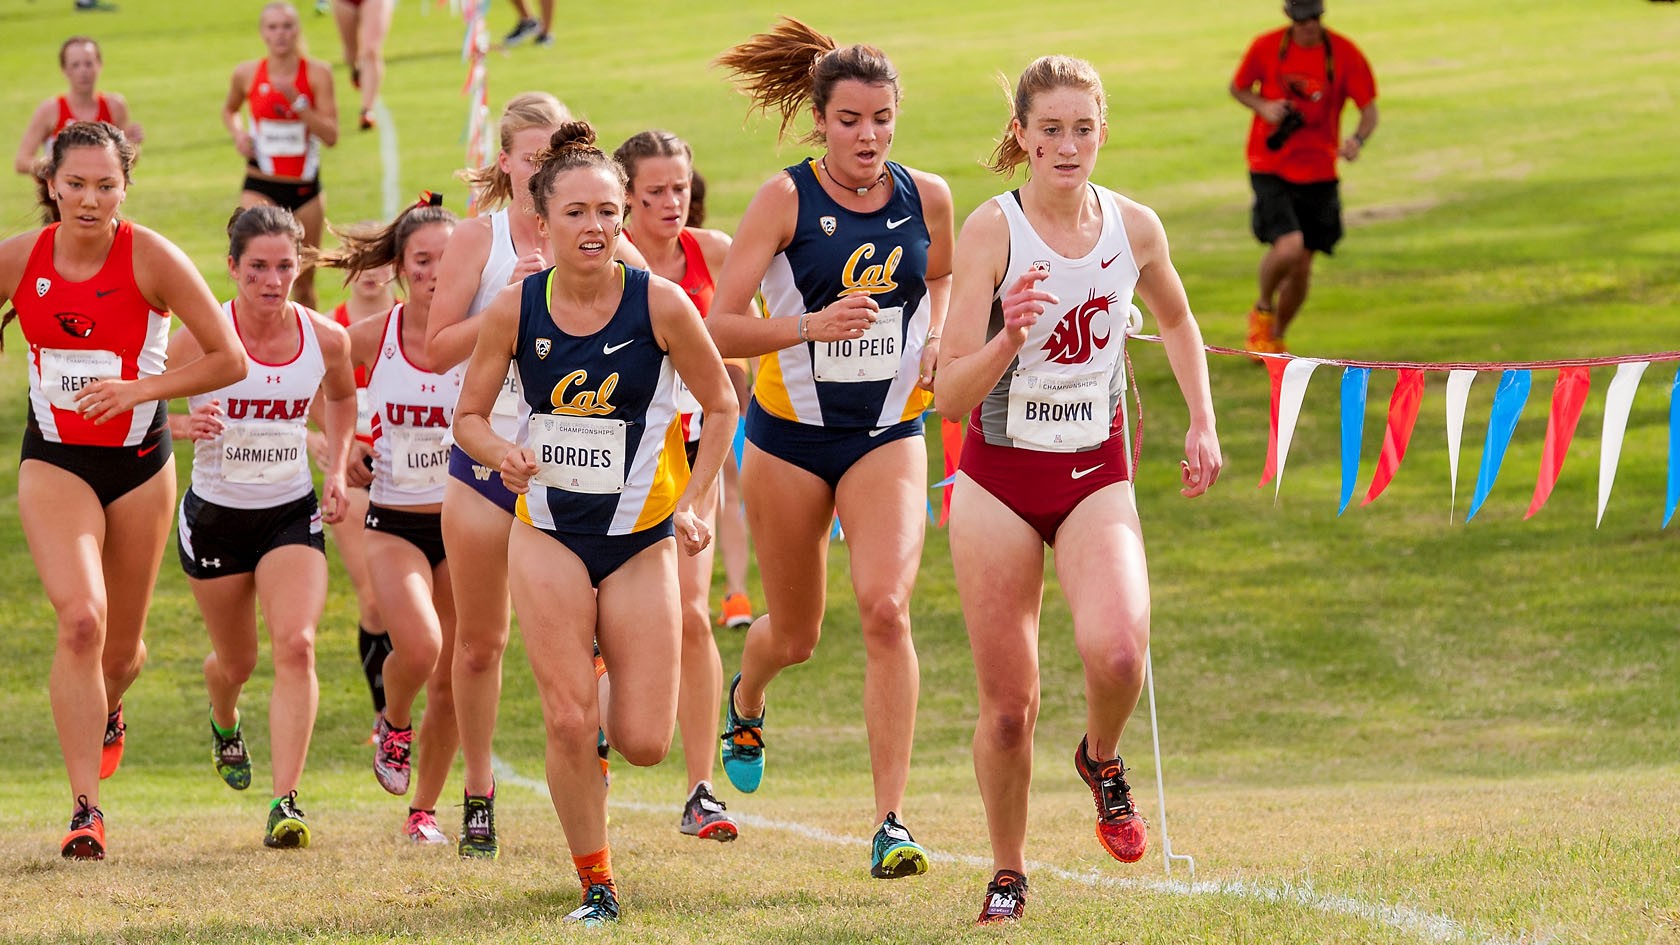 PAC12 CHAMPIONSHIPS NEXT FOR WSU CROSS COUNTRY